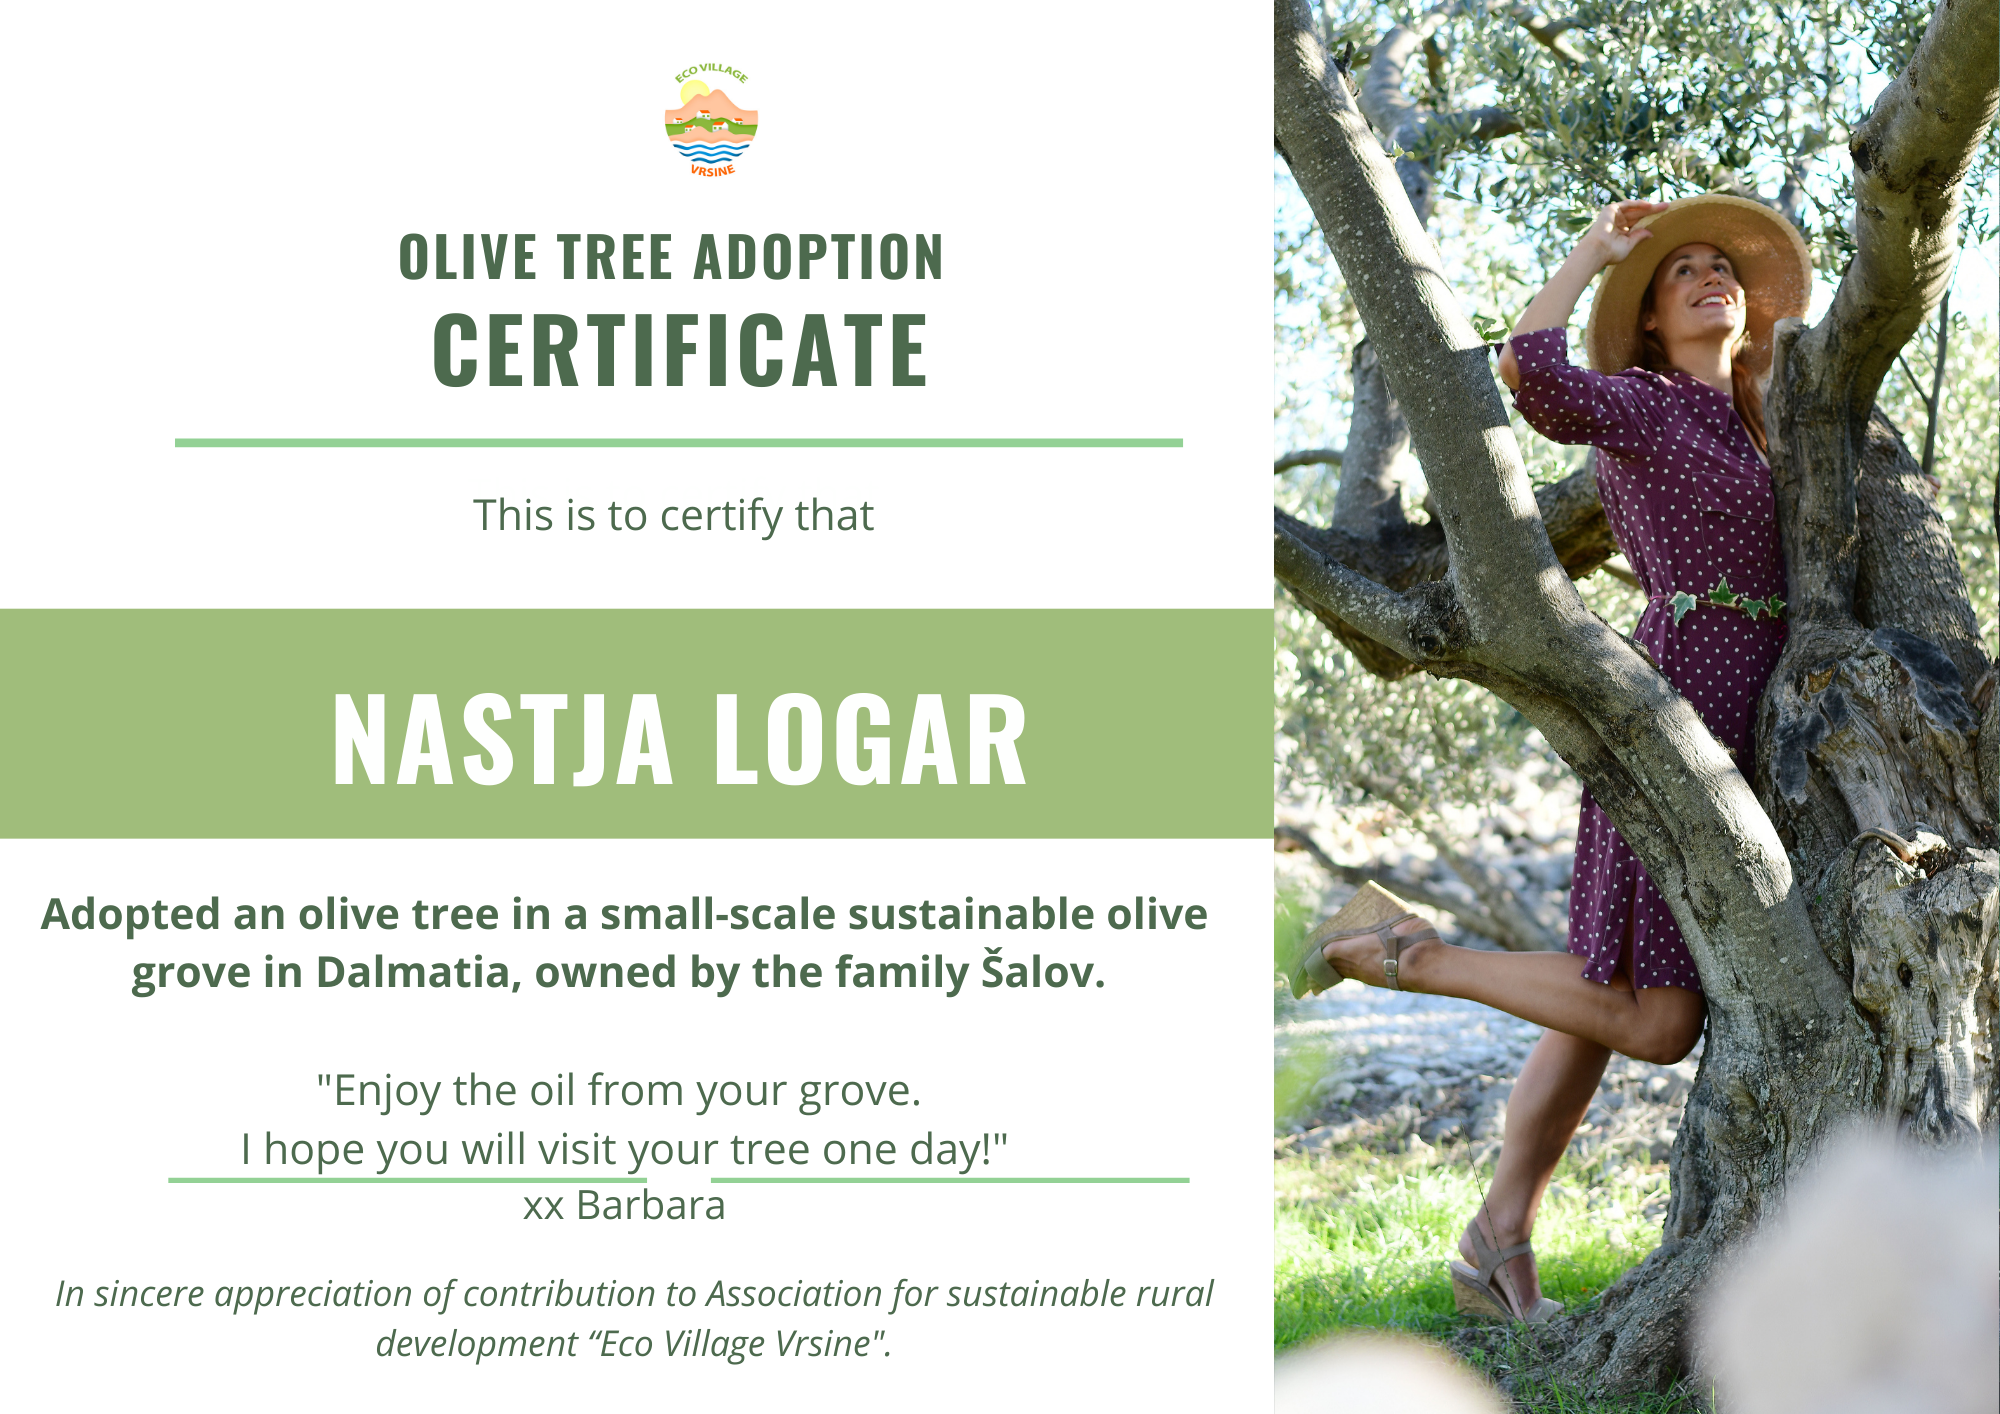 Adopt an olive tree certificate